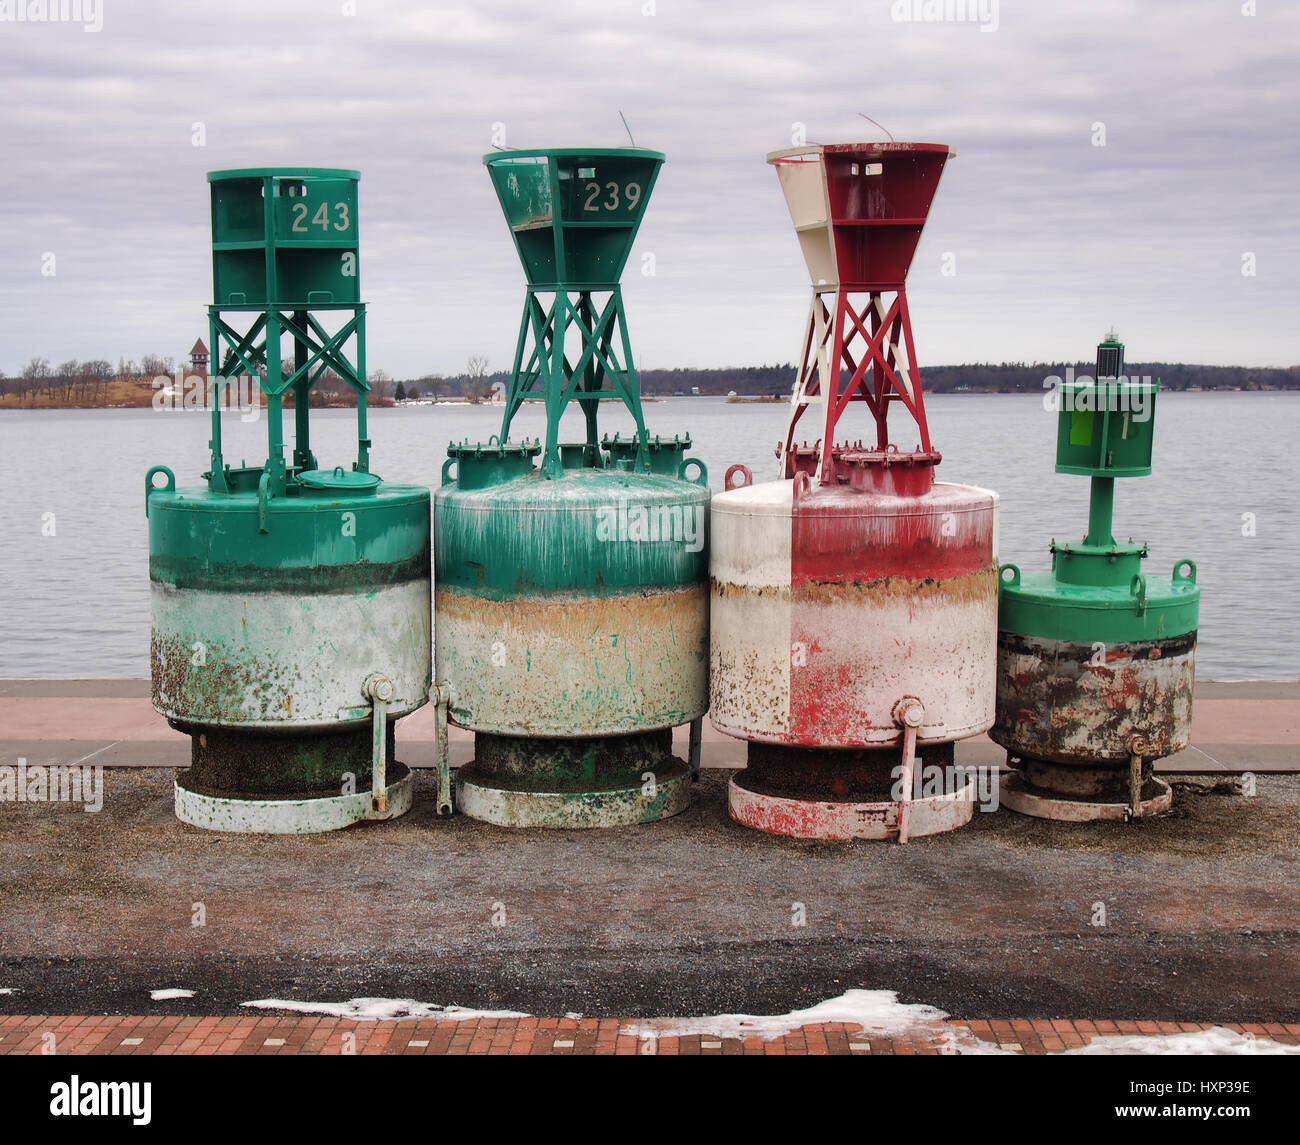 Navigational buoys docked on the shore of The Saint Lawrence River Stock Photo